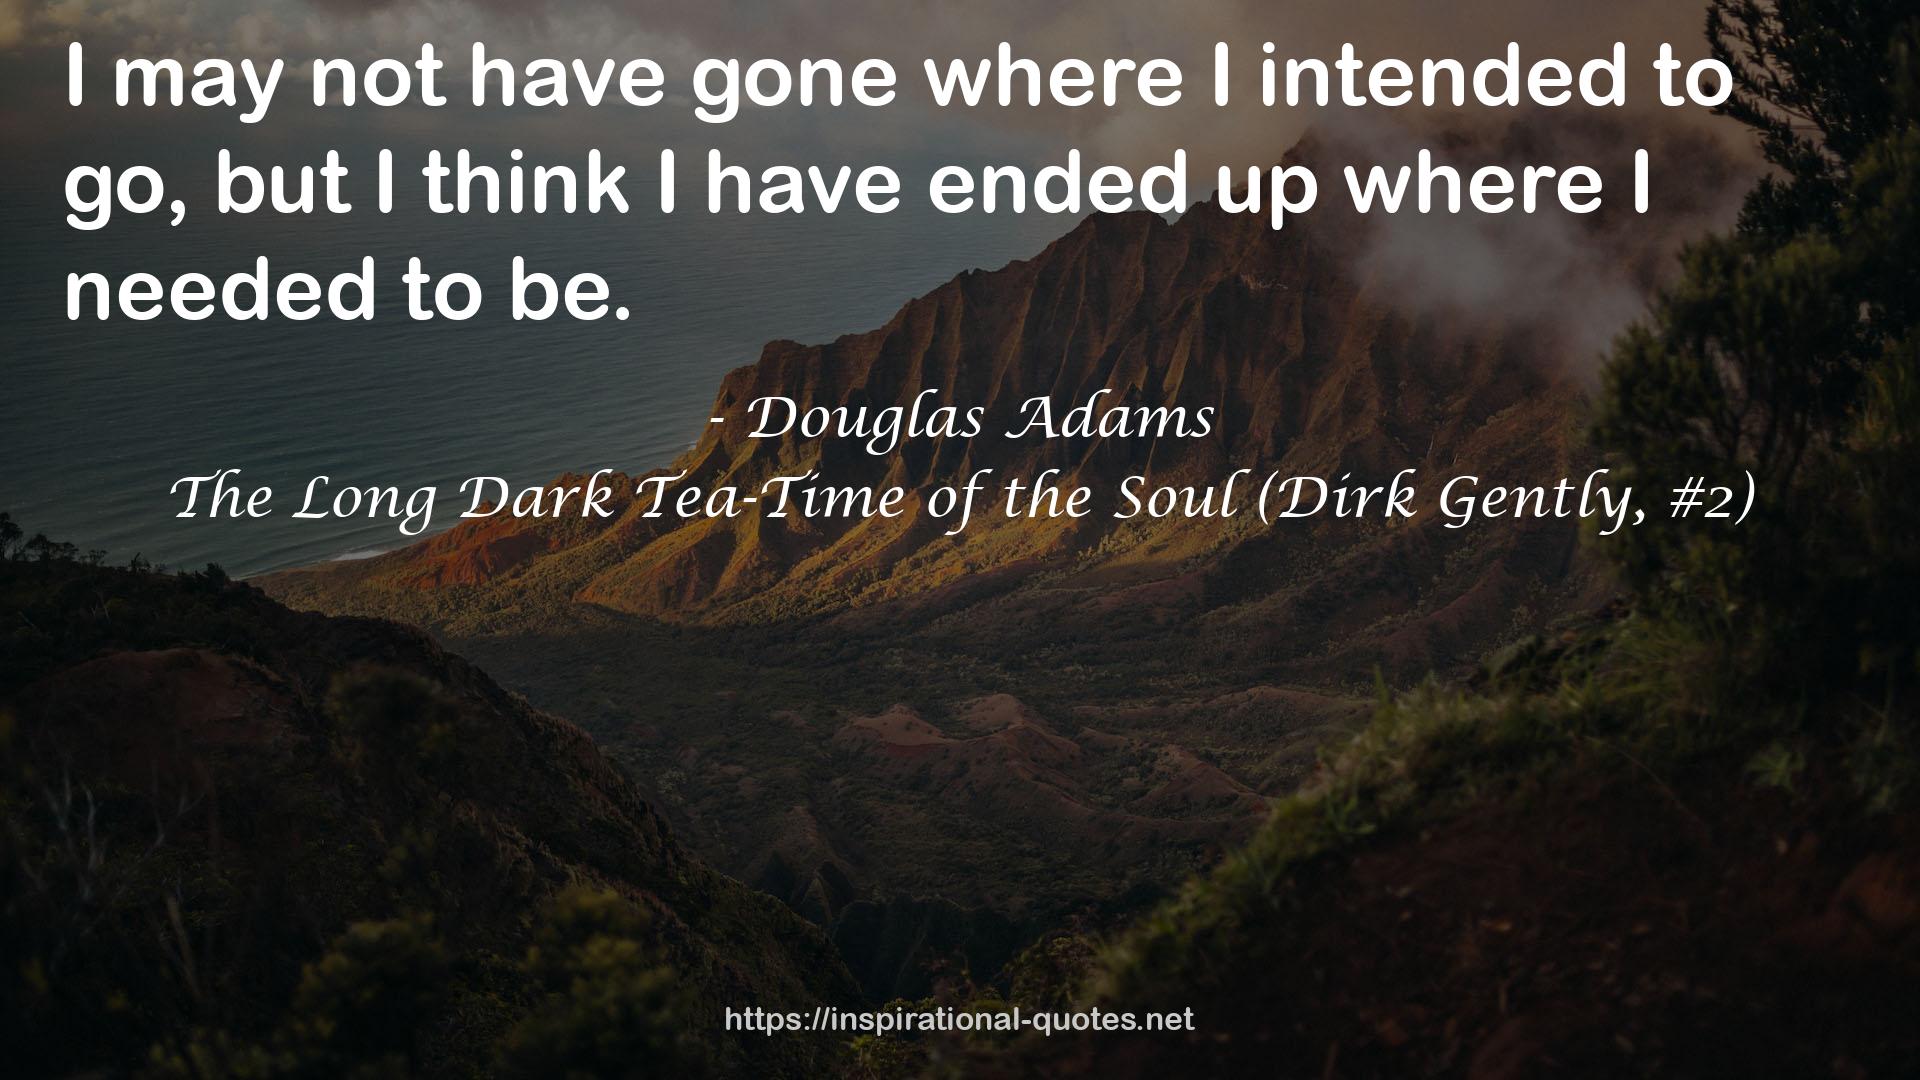 The Long Dark Tea-Time of the Soul (Dirk Gently, #2) QUOTES